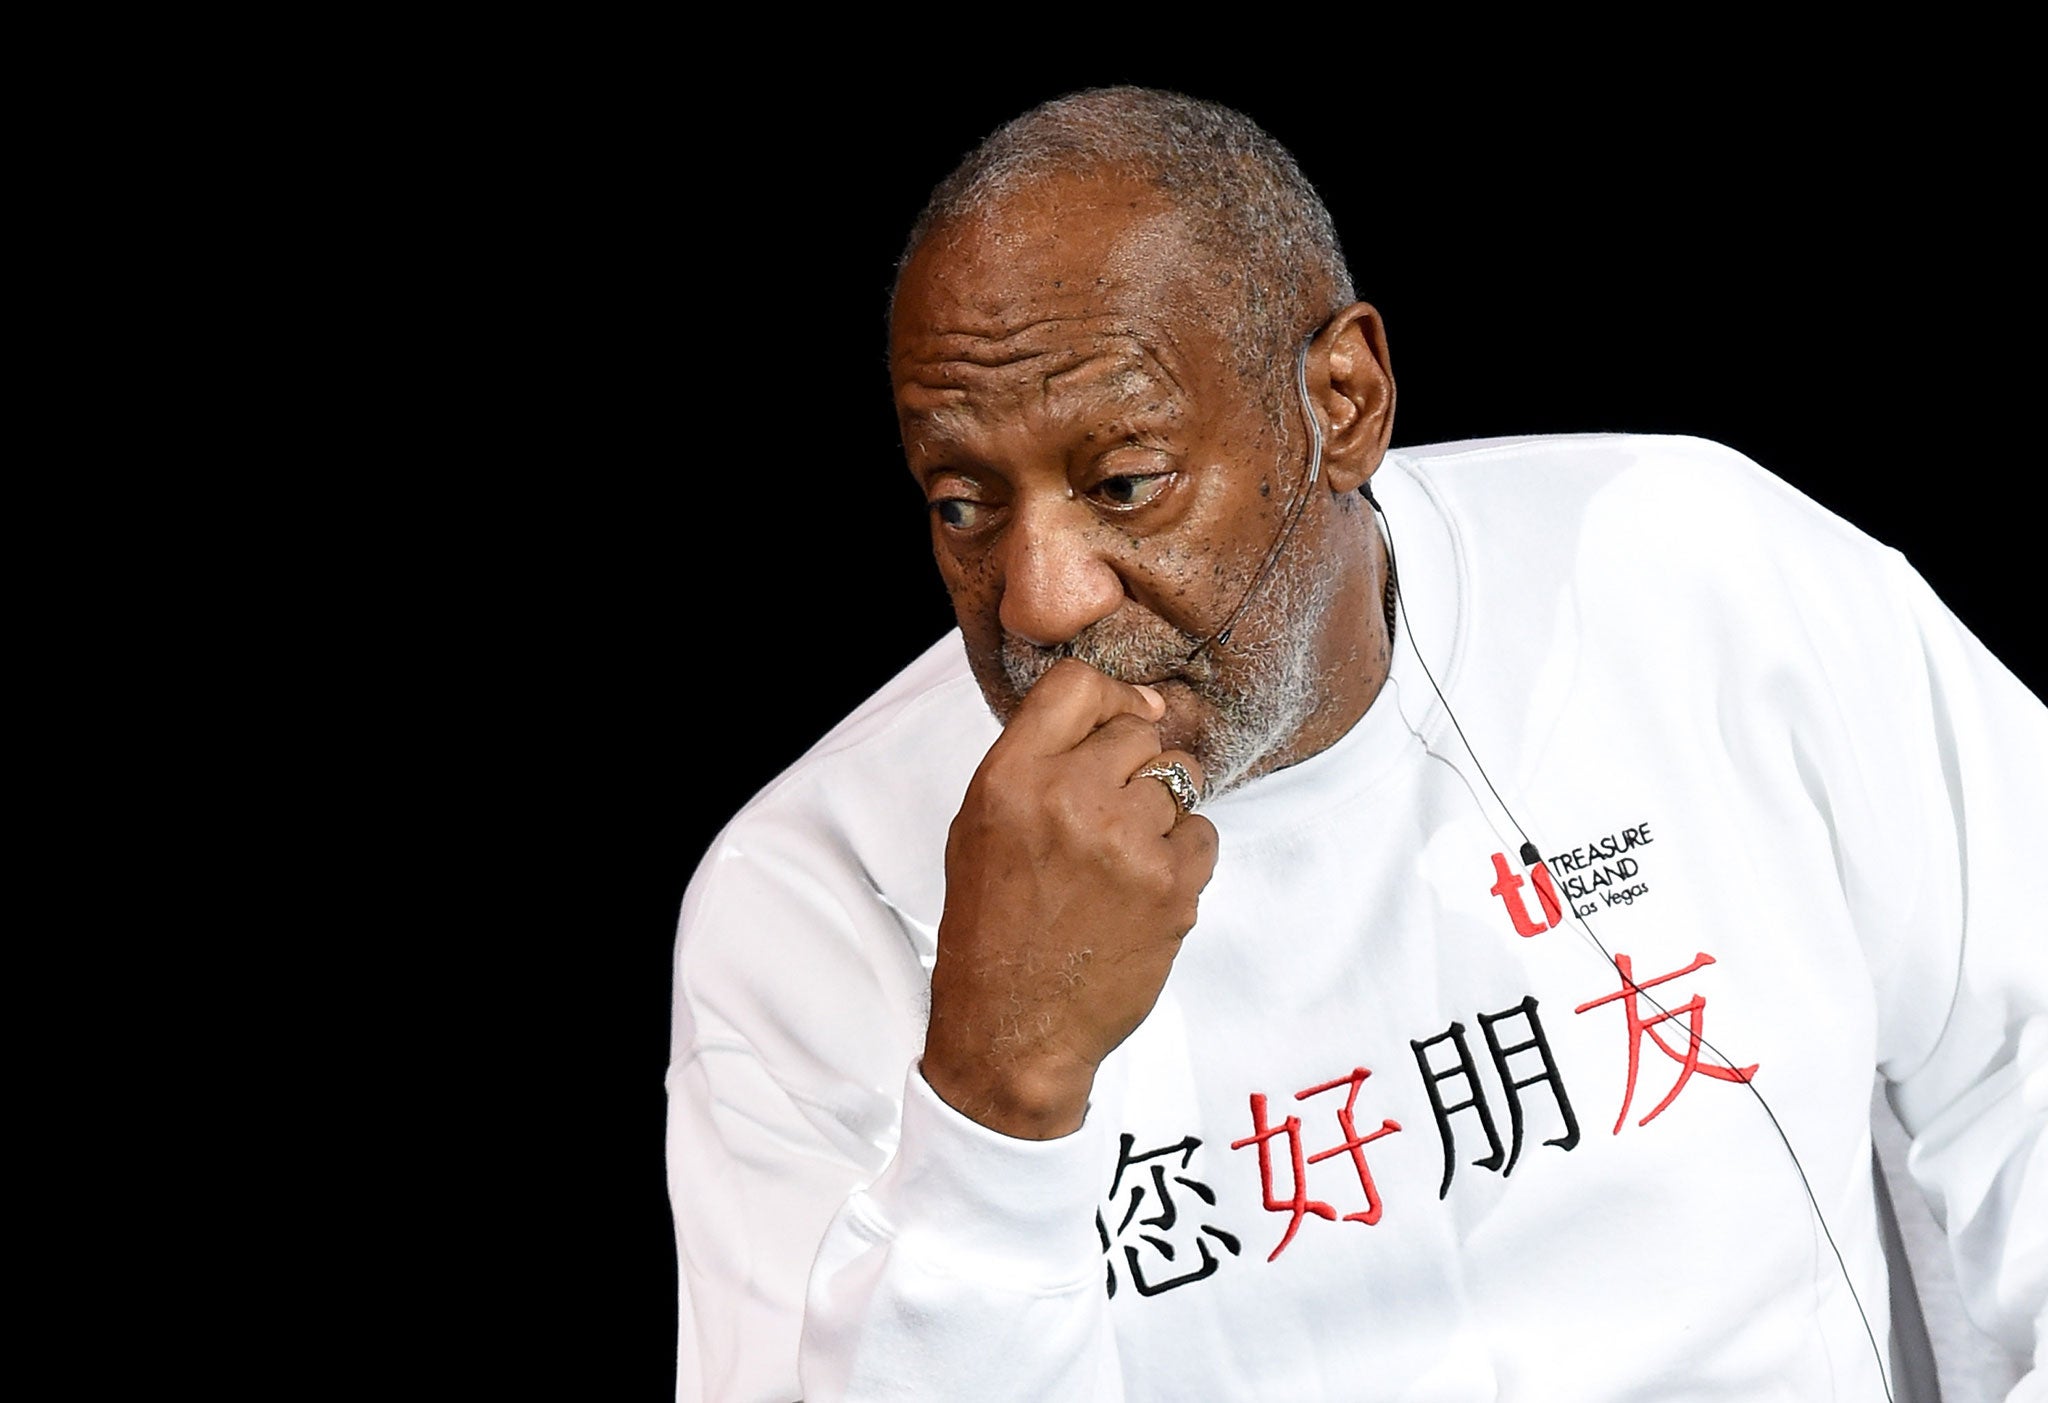 Cosby has been accused of multiple sexual assaults by over two dozen women dating as far back as the 1970s